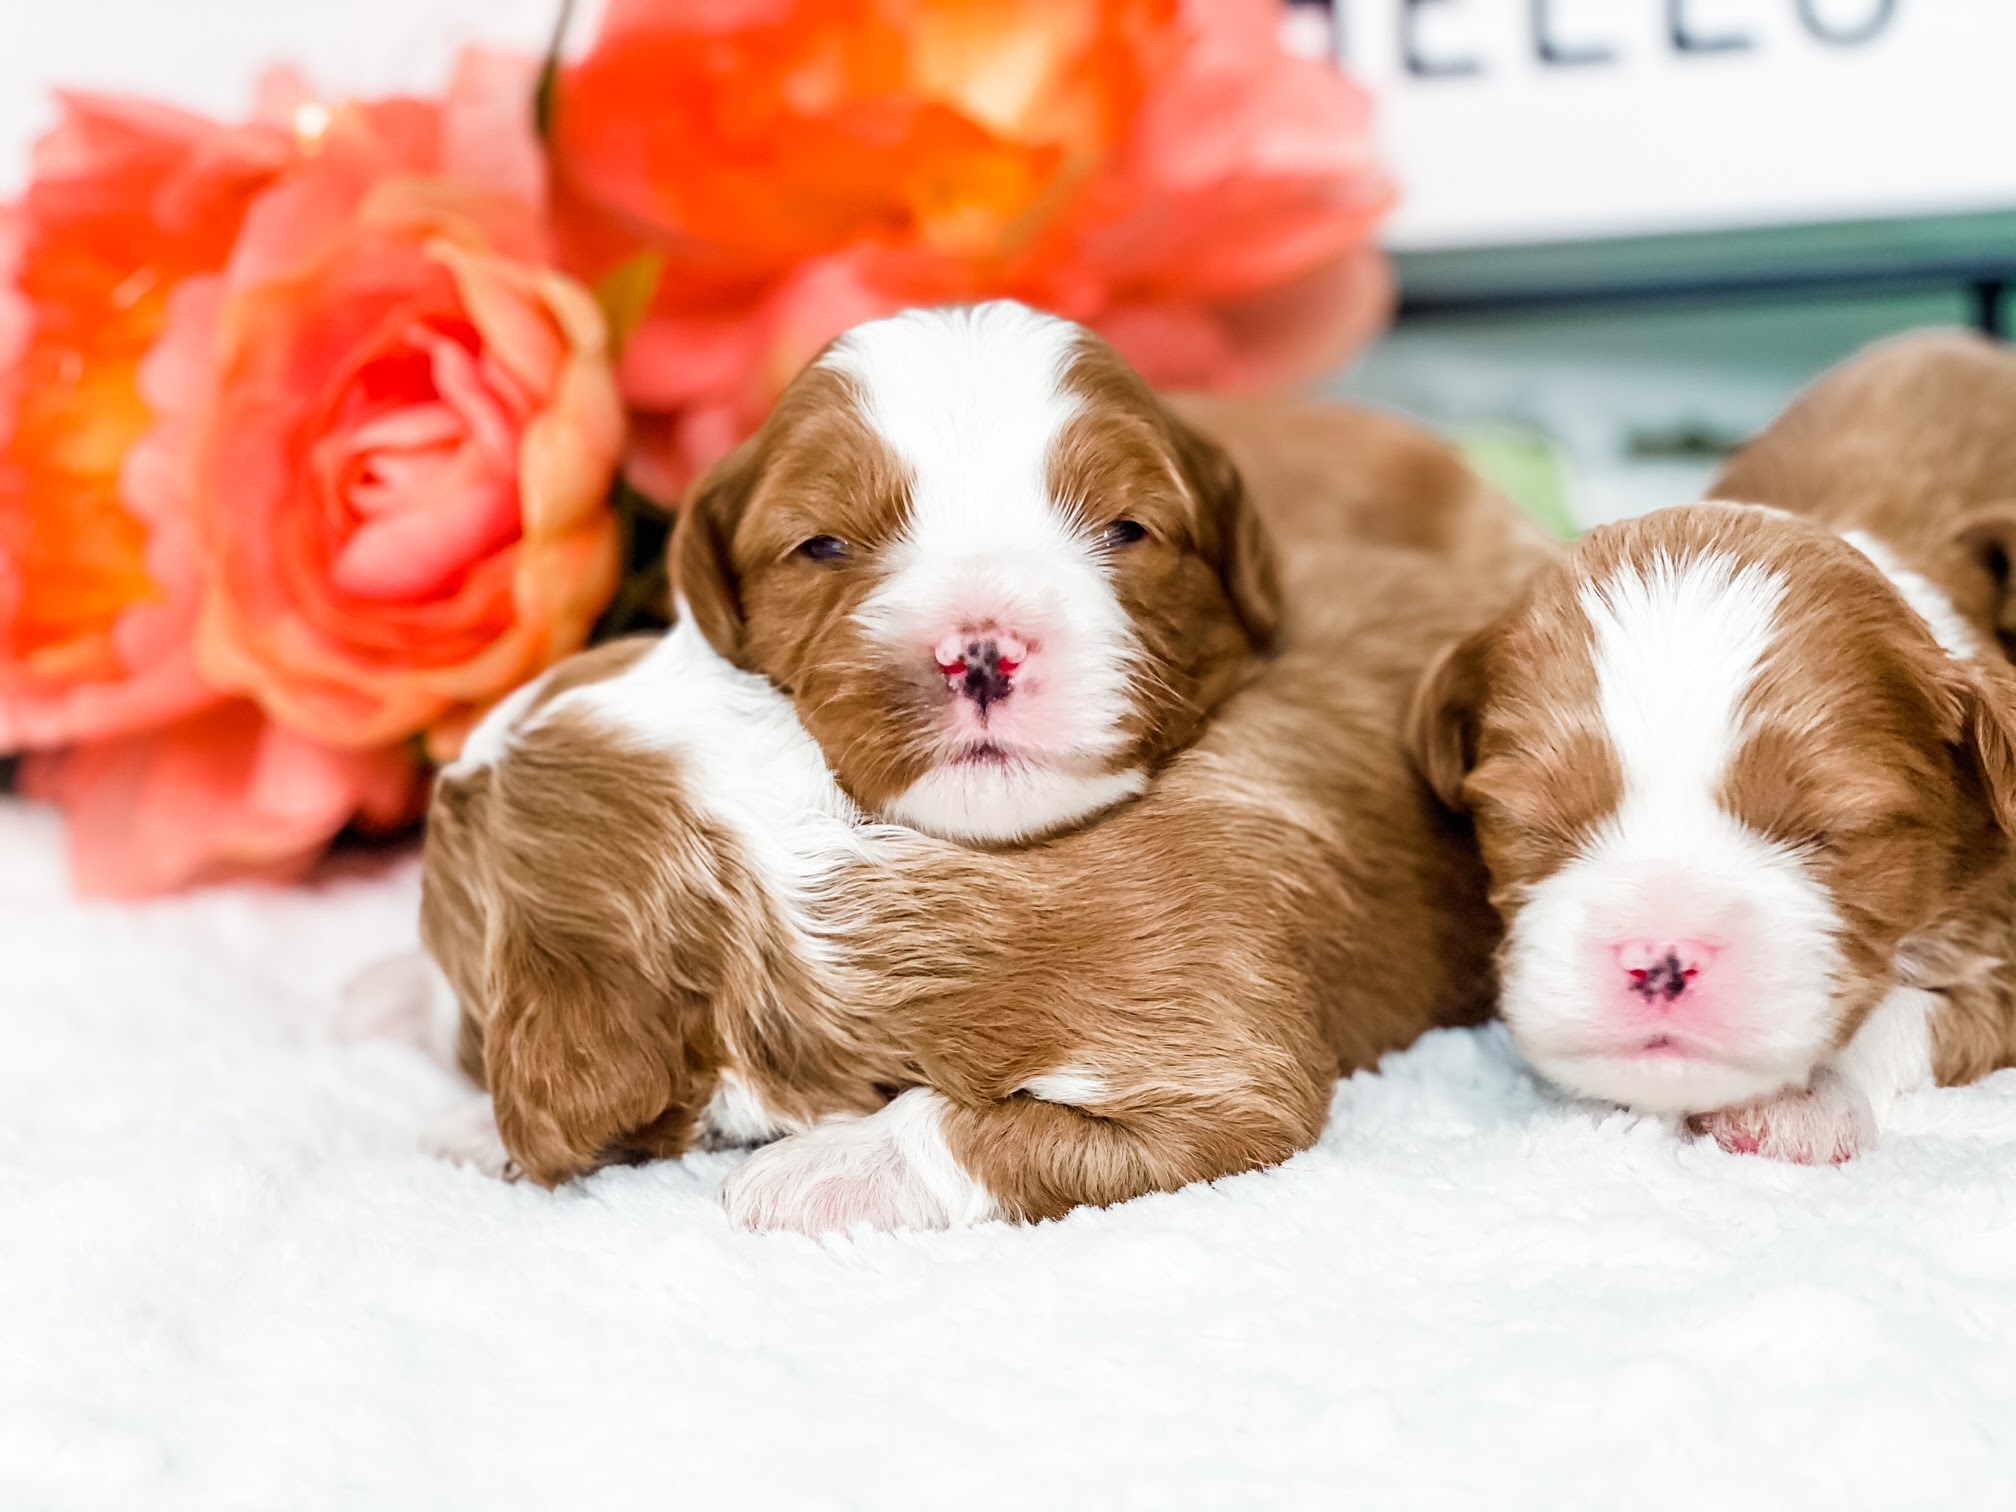 Three adorable brown and white Cavoodles/Cavapoos puppies snuggle on top of each other, one resting its head on the other's back.